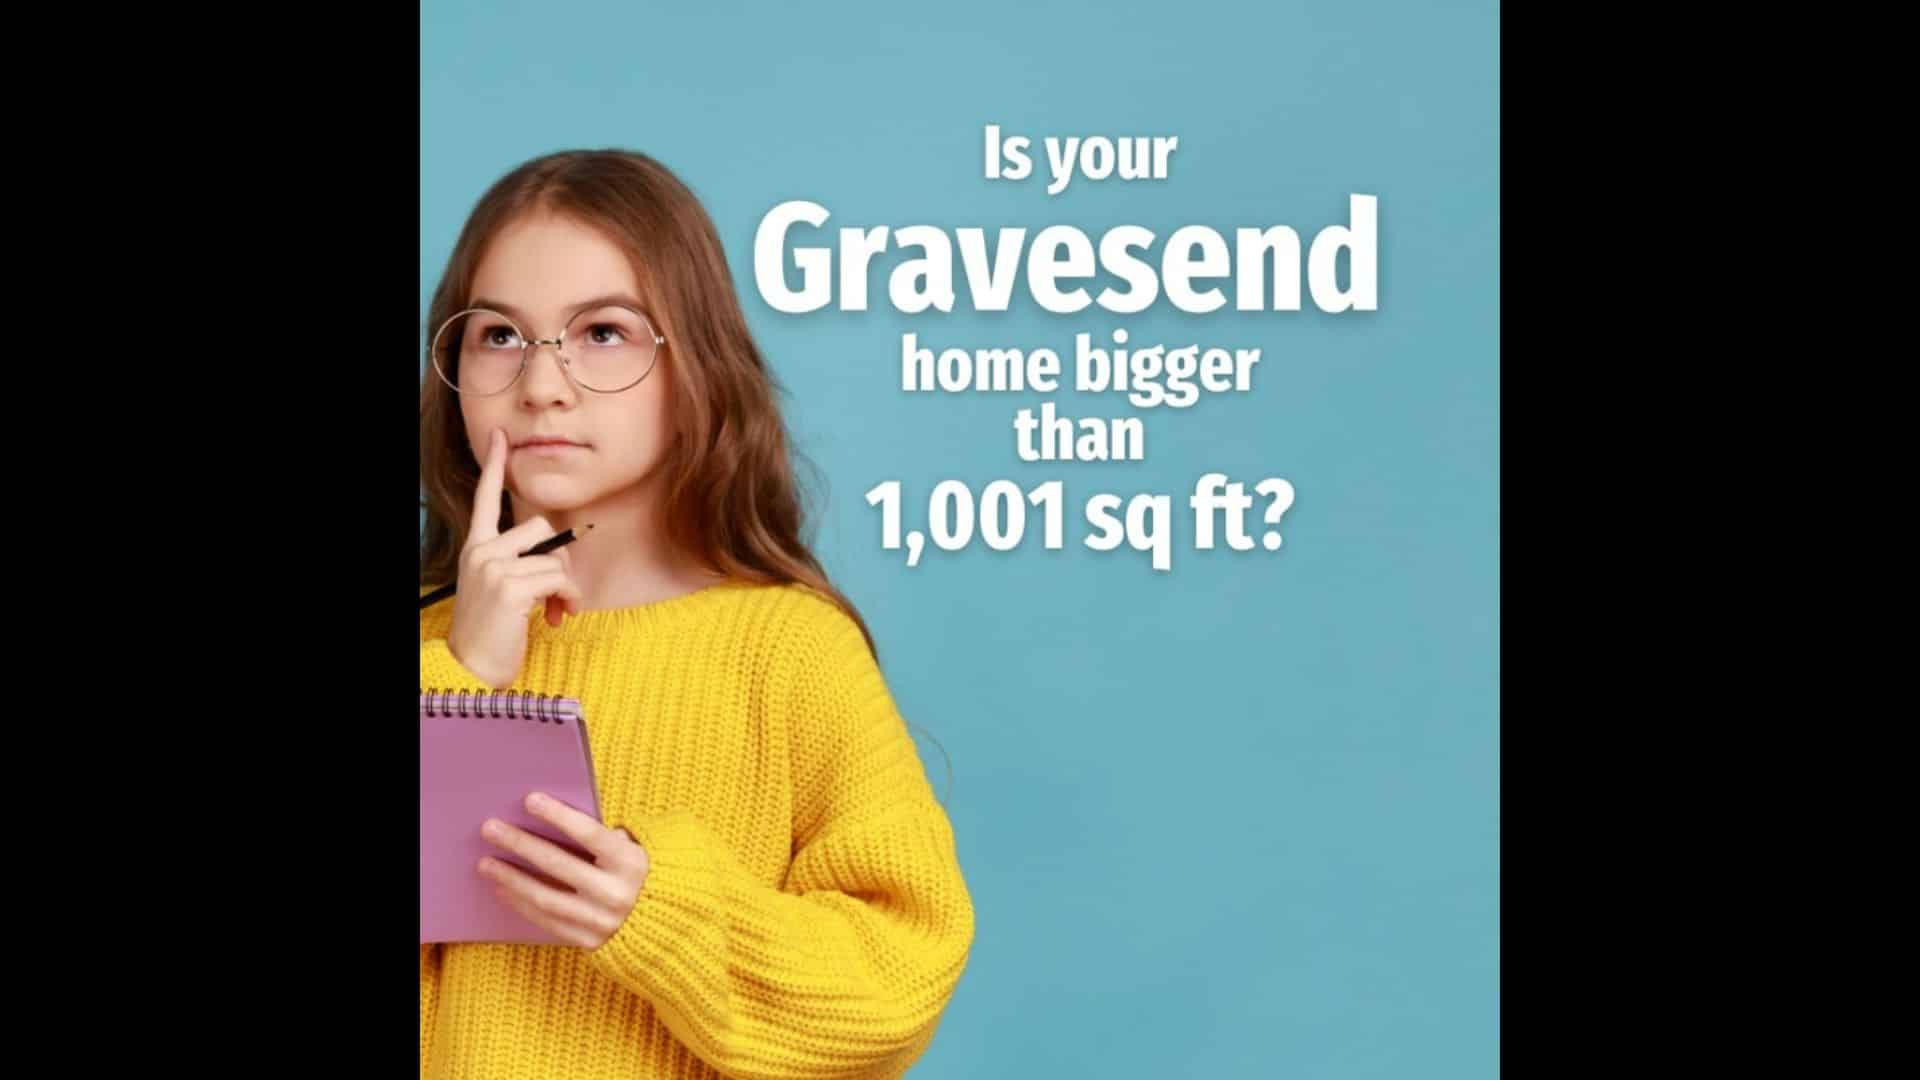 Is Your Gravesend Home Bigger Than 1,001 Sq Ft?